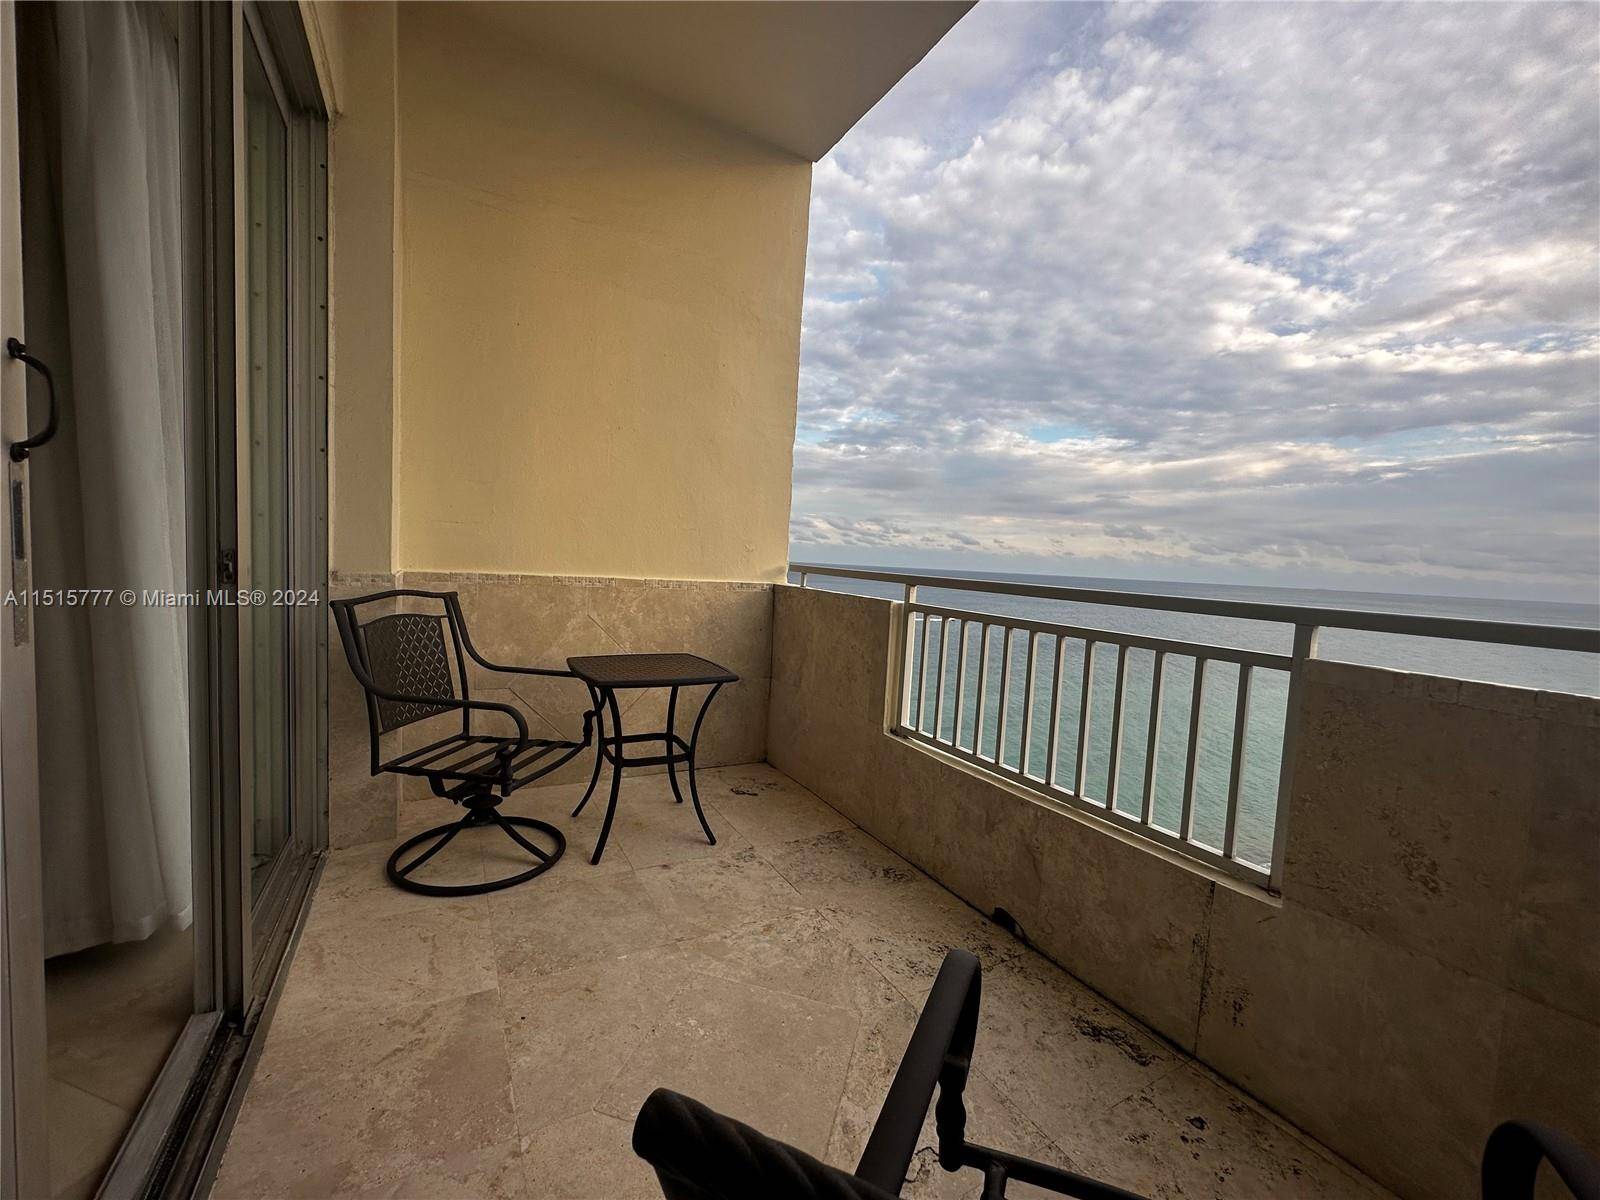 Stunning penthouse unit with direct ocean and city views from each room in the oceanfront building available for immediate occupancy.